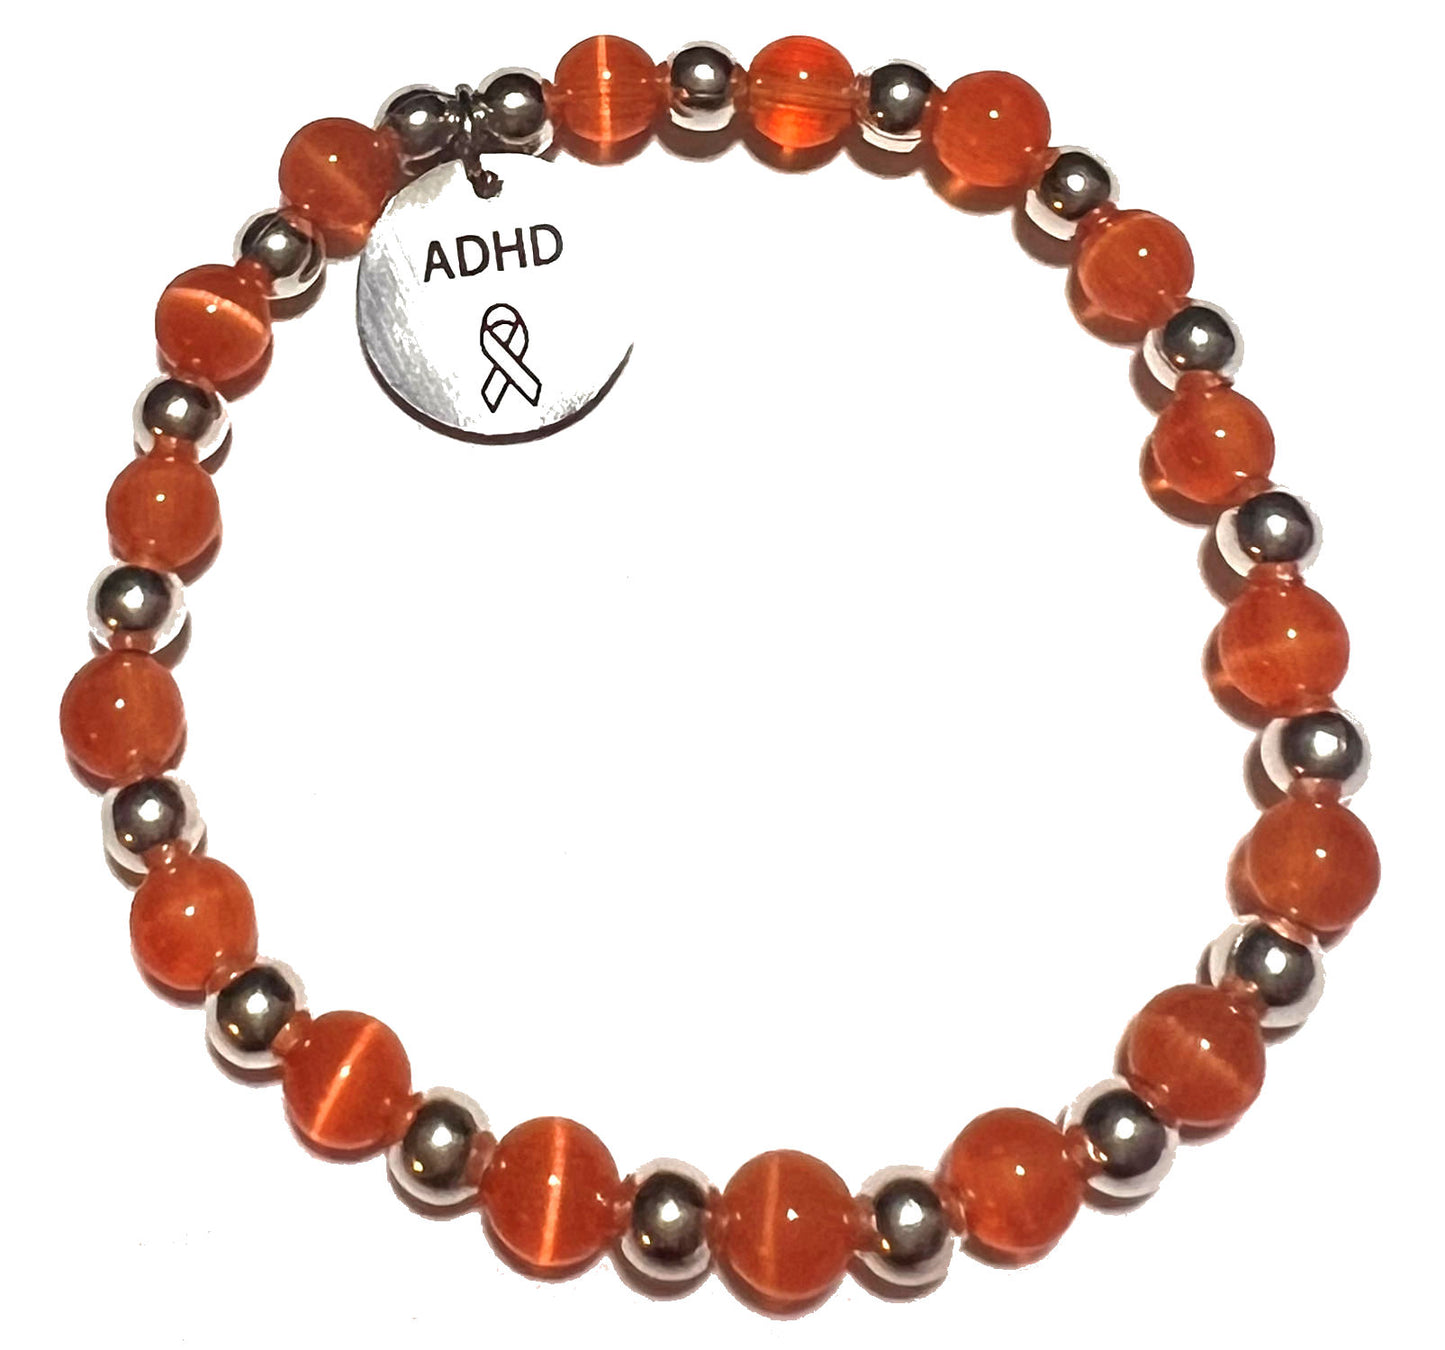 ADHD, ADD, Attention Deficit Hyperactive Disorder Awareness Charm Beaded Bracelet, 7.75 Inches, Orange, Dark Orange Color, Handbeaded in the USA